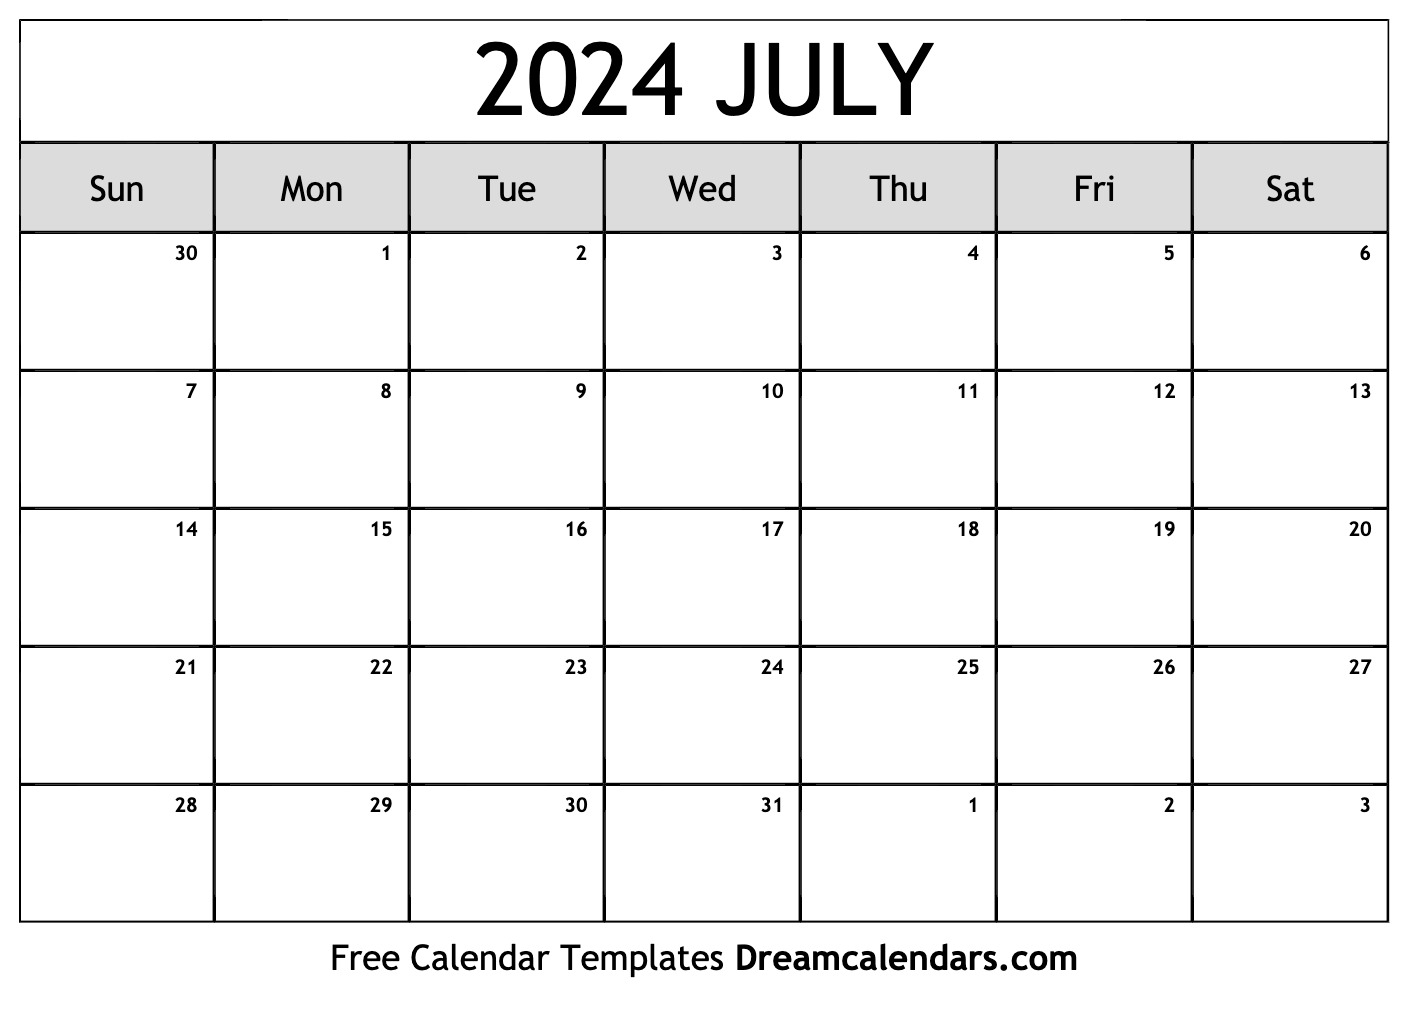 July 2024 Calendar | Free Blank Printable With Holidays for Free Printable Calendar May June July 2024